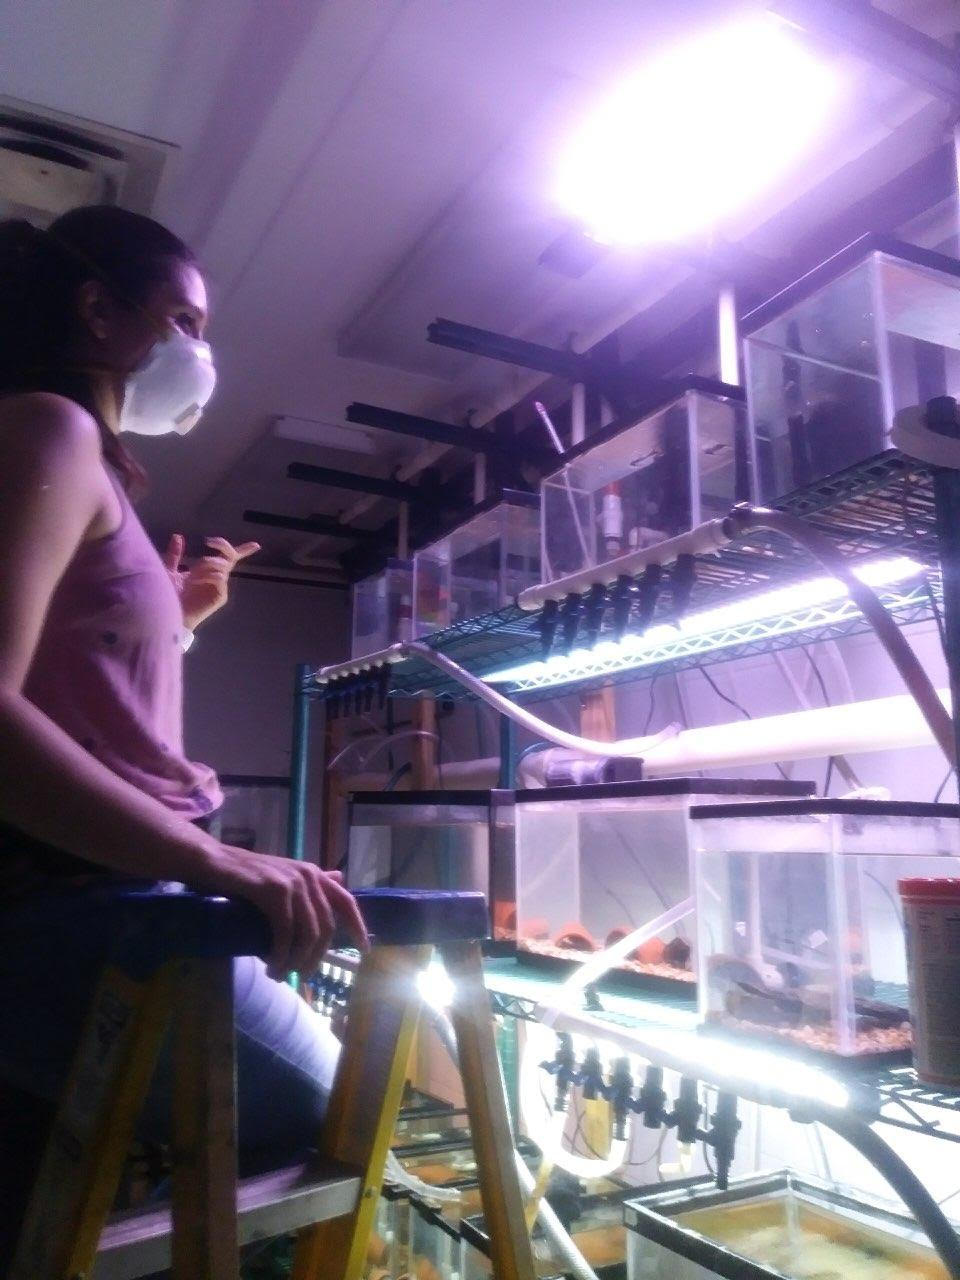 A person wearing an N95 mask stands on a ladder next to a shelving system with 5-gallon fish tanks.